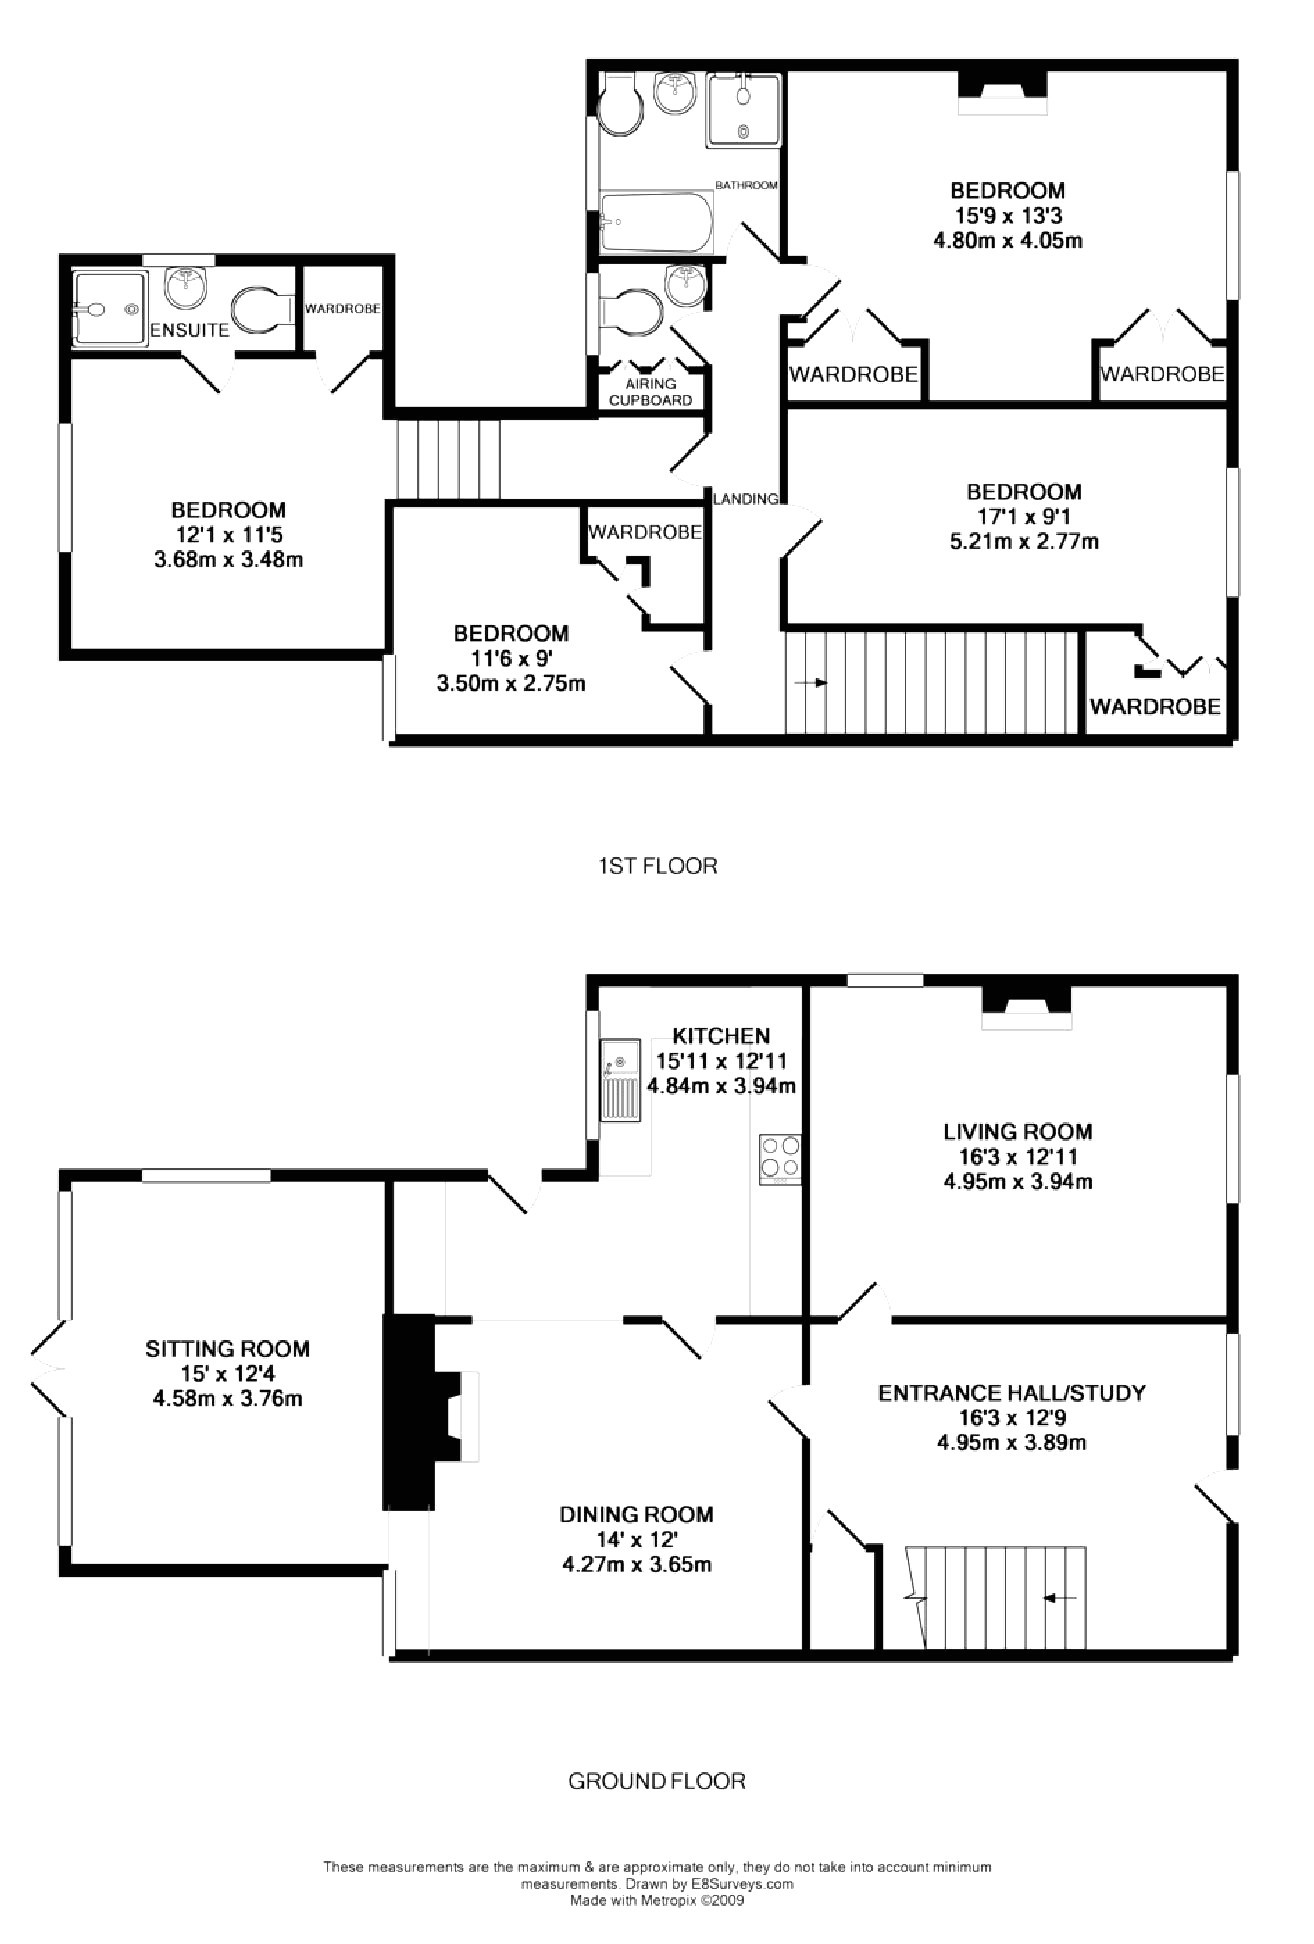 archival house plans beautiful building plan drawings 40 40 house plans lovely home plans 0d